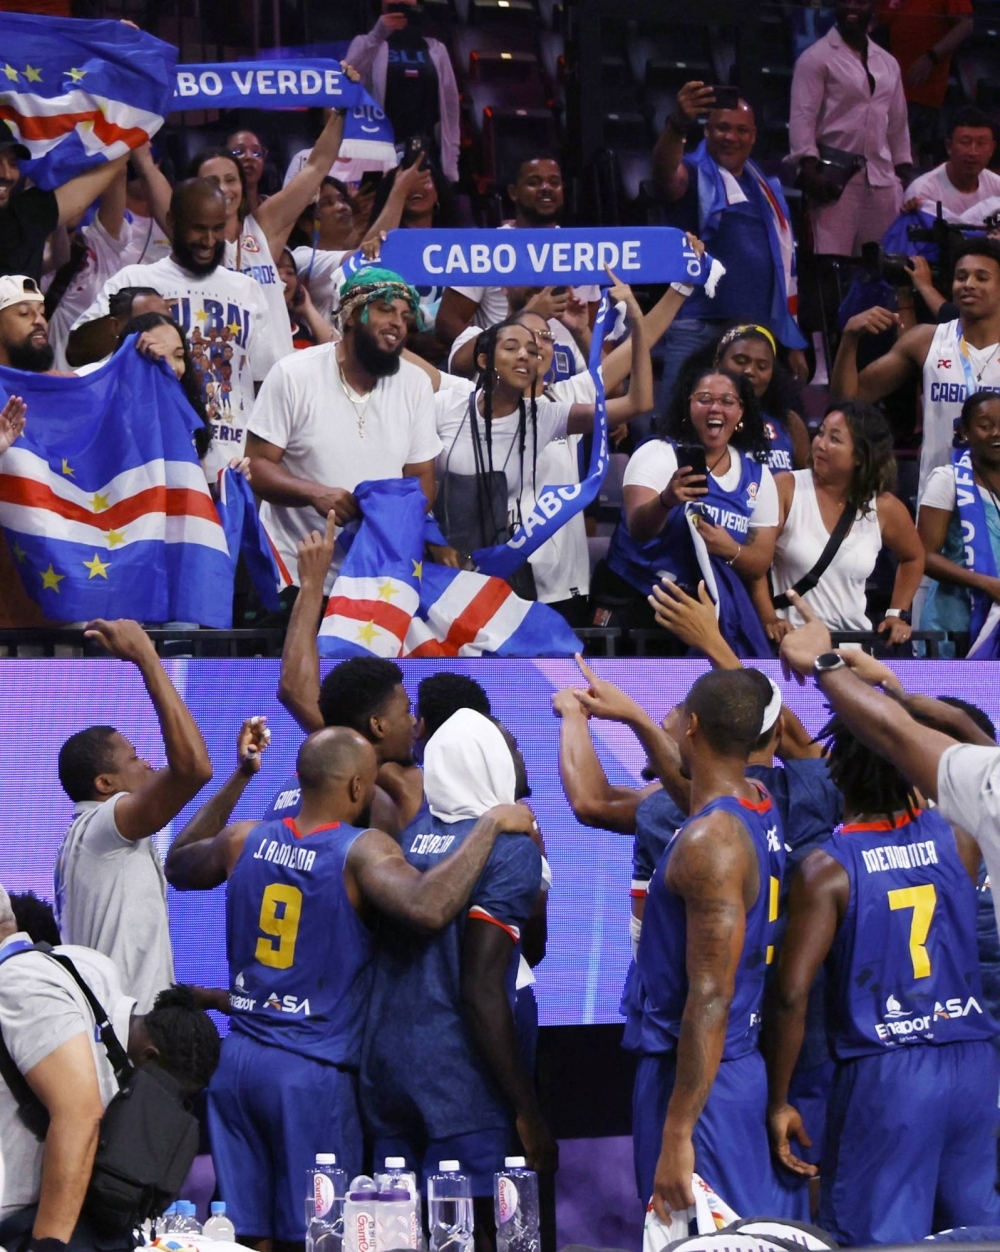 Cape Verde players (front) celebrate with fans after their win over Venezuela in a FIBA Basketball World Cup Group F game at Okinawa Arena in Okinawa Prefecture on Monday.